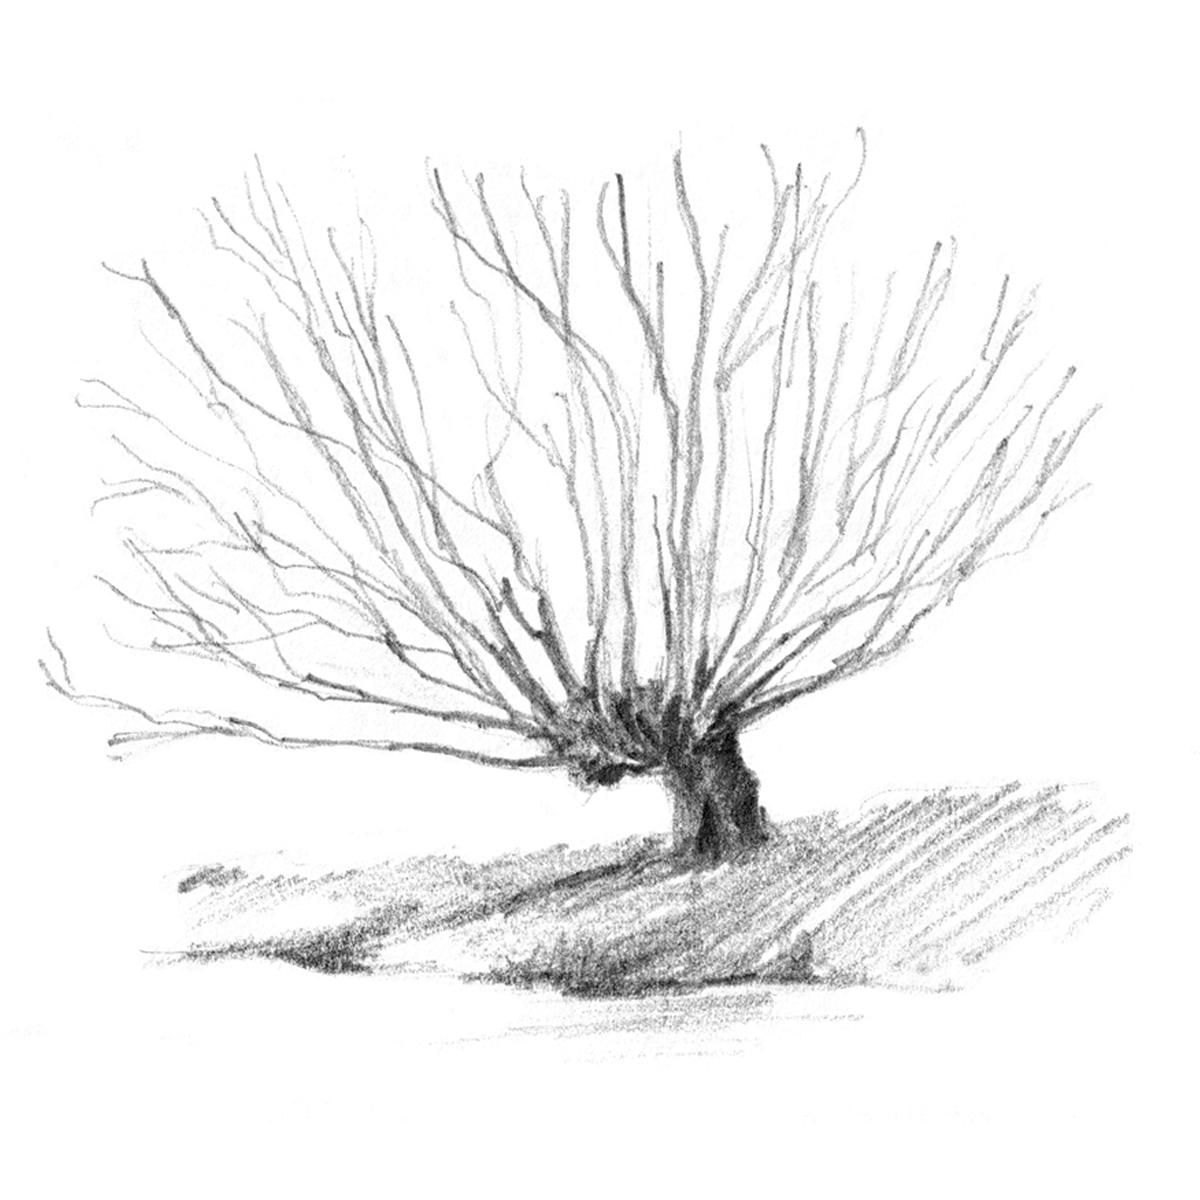 Limited edition print from pencil sketch of a willow tree